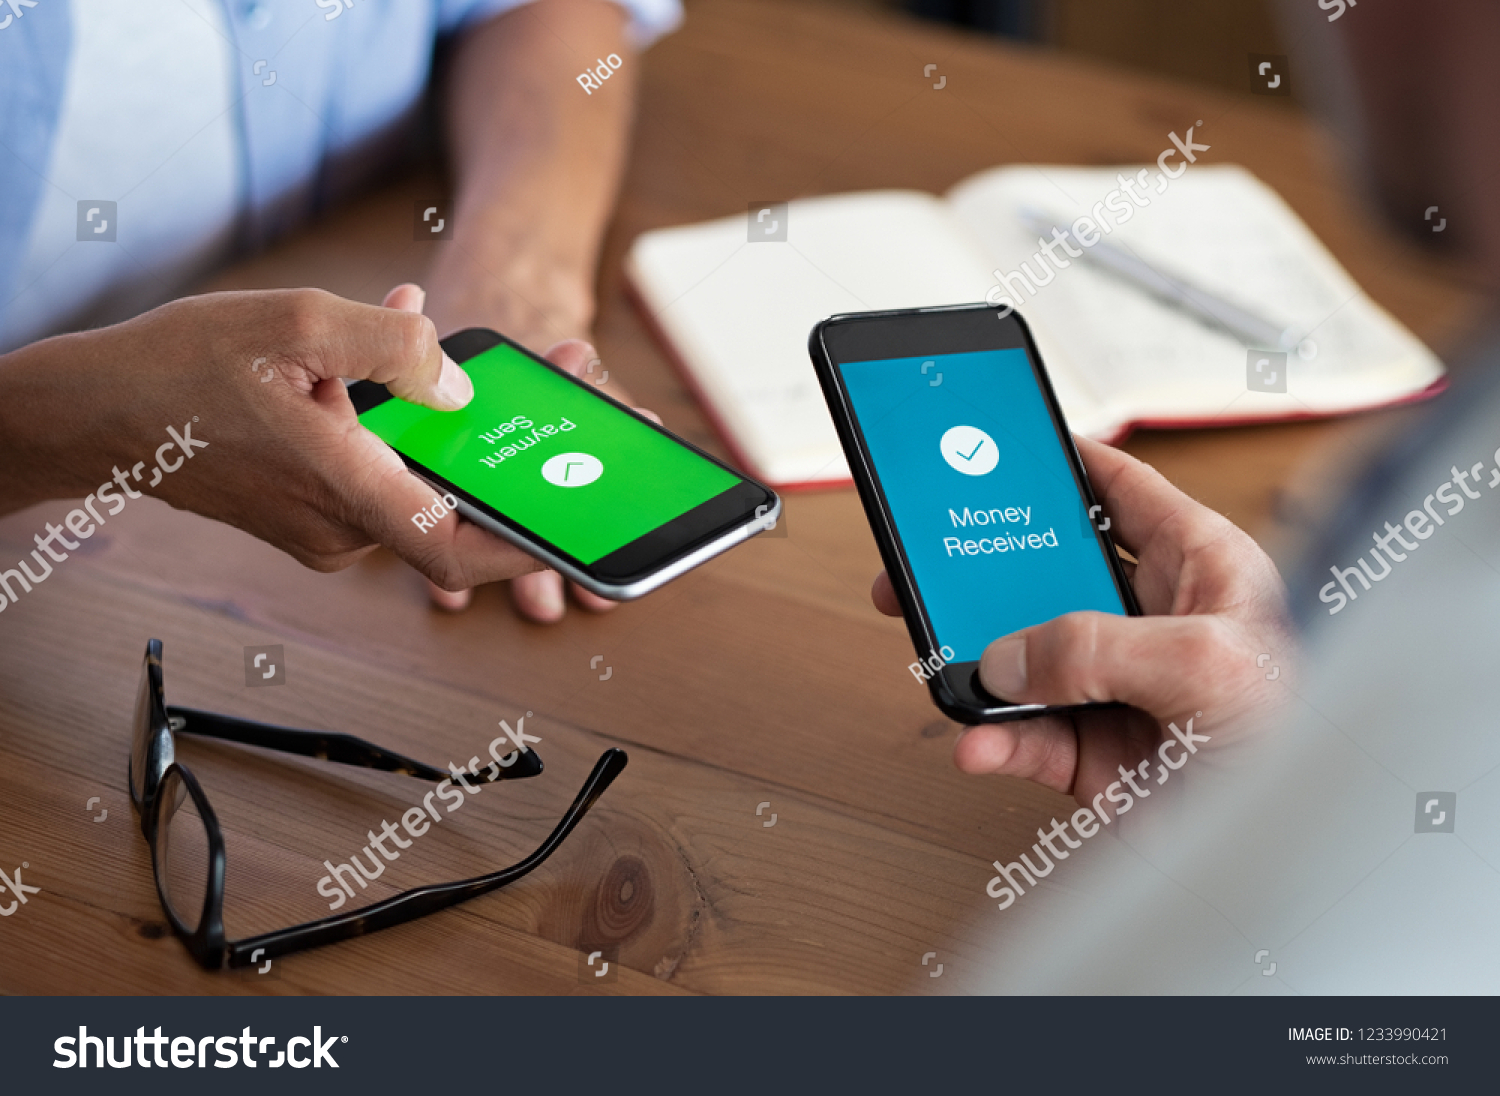 Closeup hands holding mobile phone with application for send and receive money. Man and woman holding smartphone and making payment transaction. Smart phone screen displaying payment sent. #1233990421